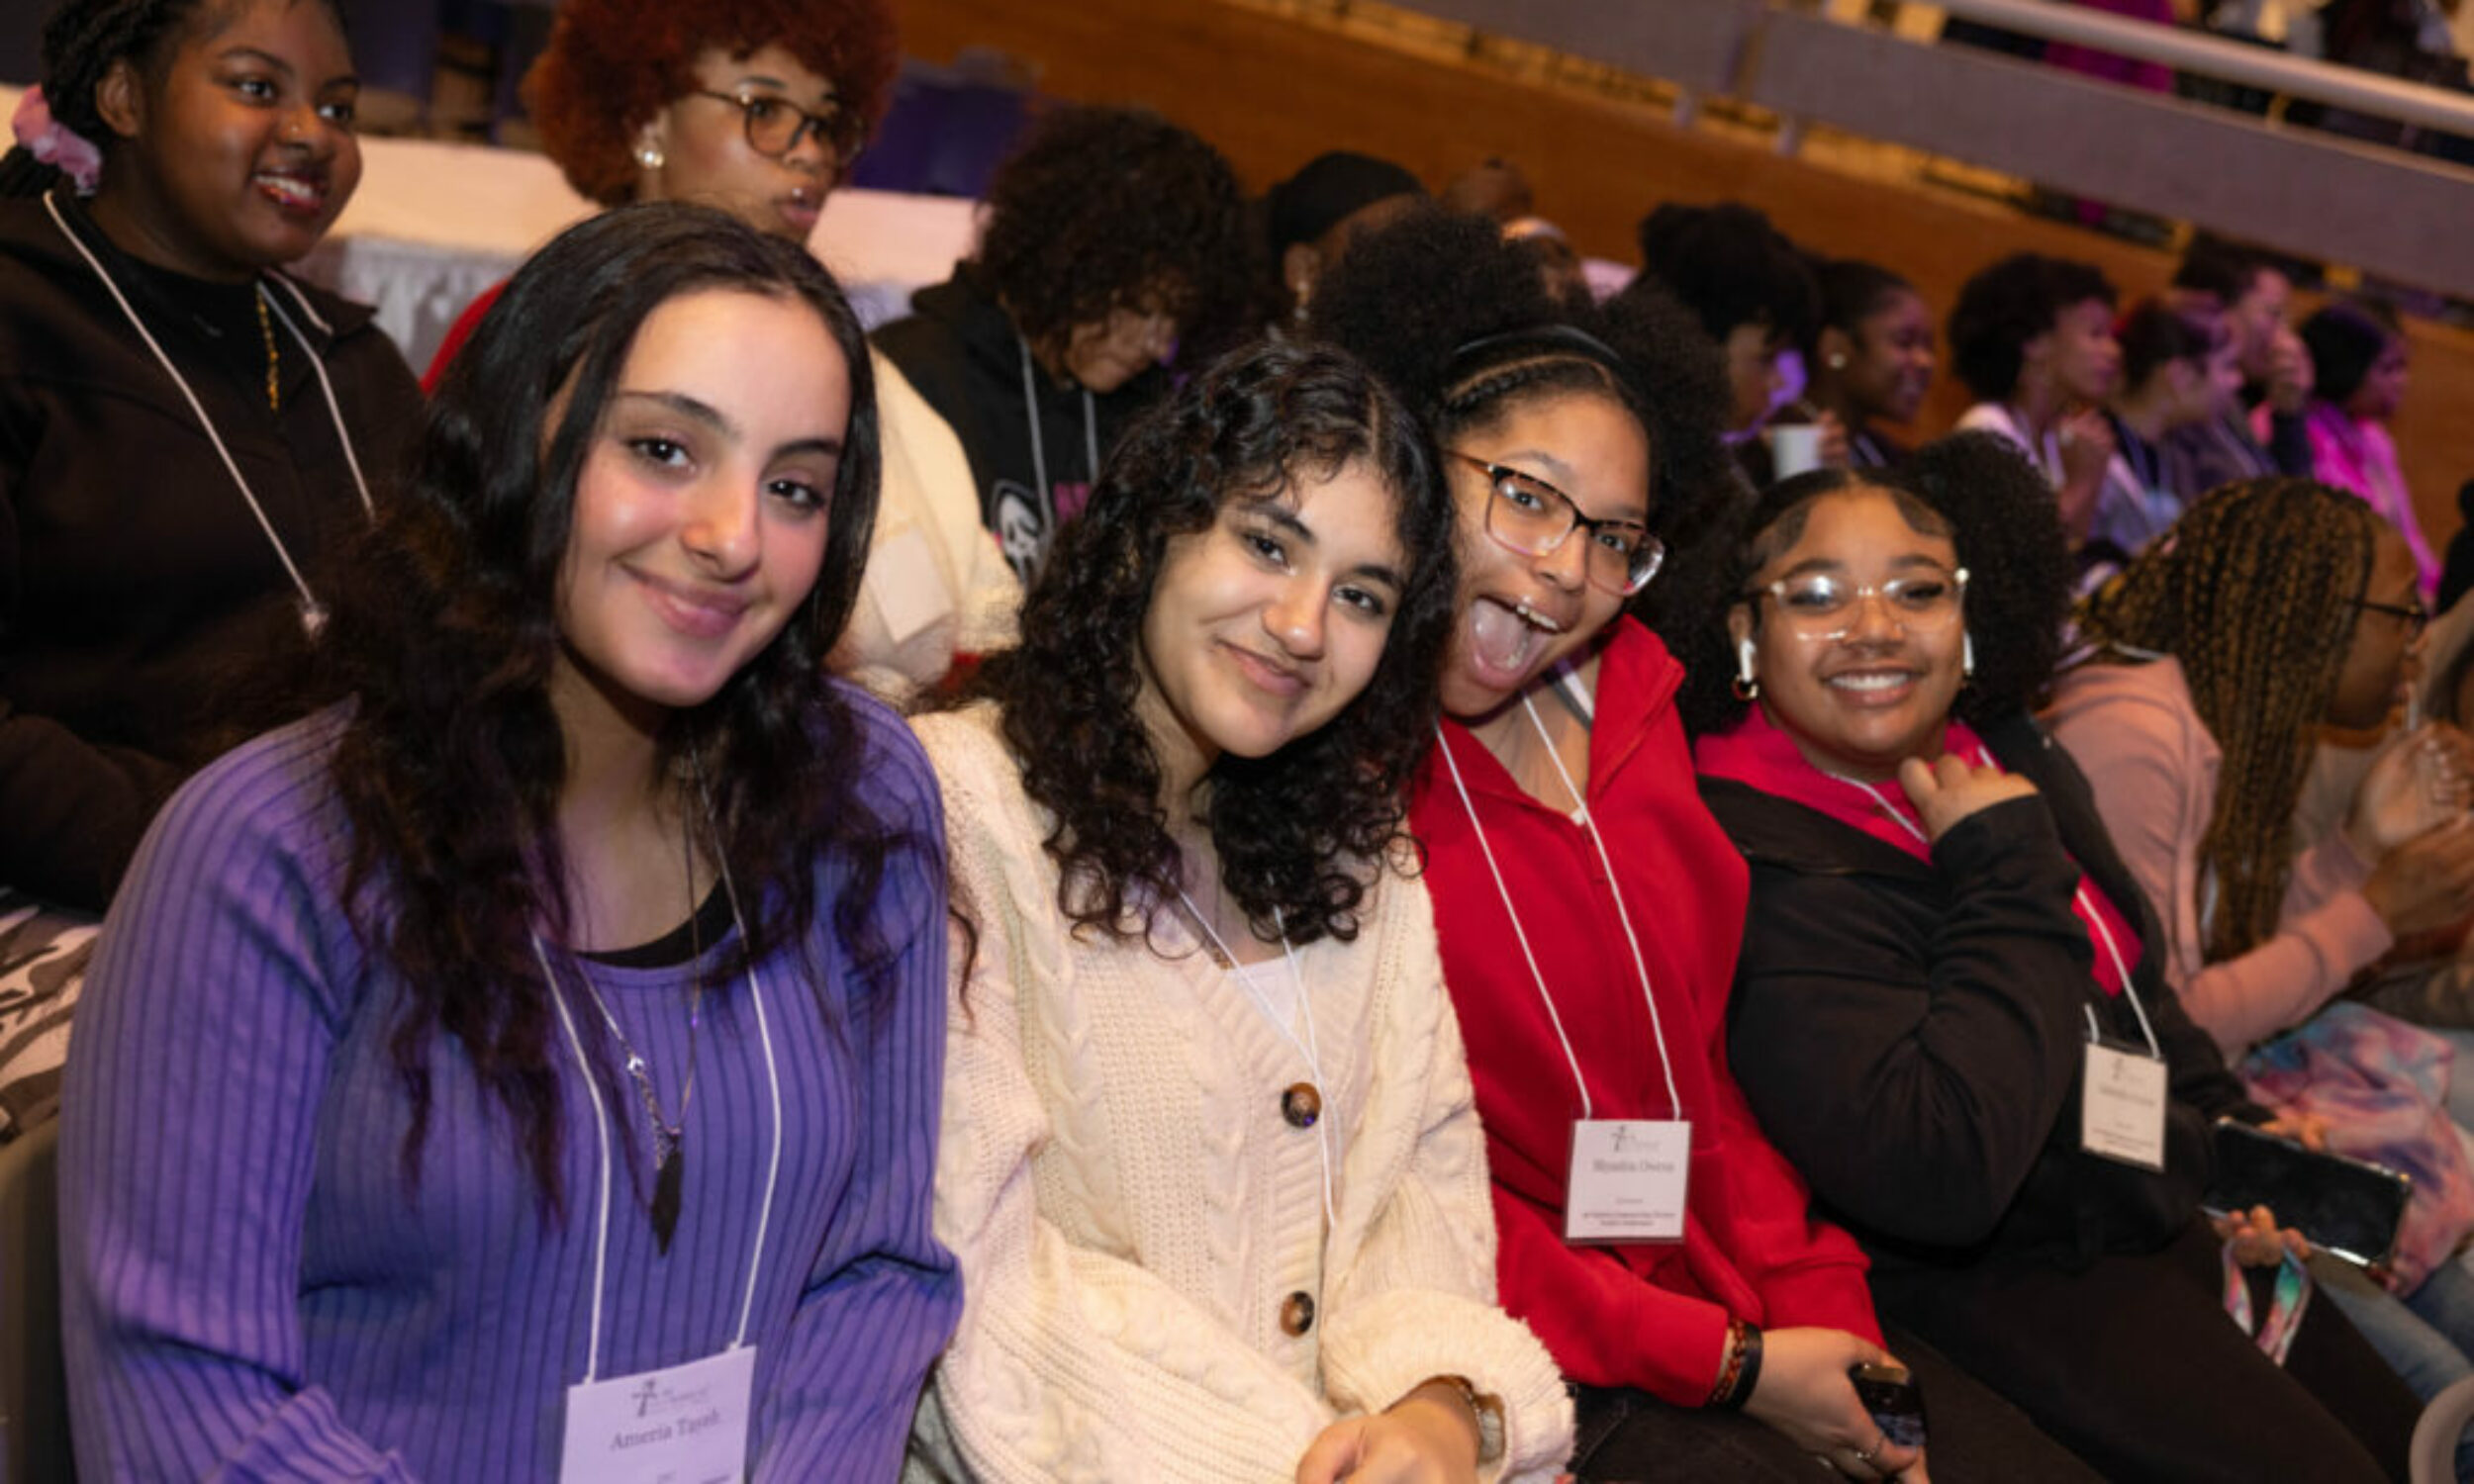 19th Annual Sisters Empowering Sisters conference